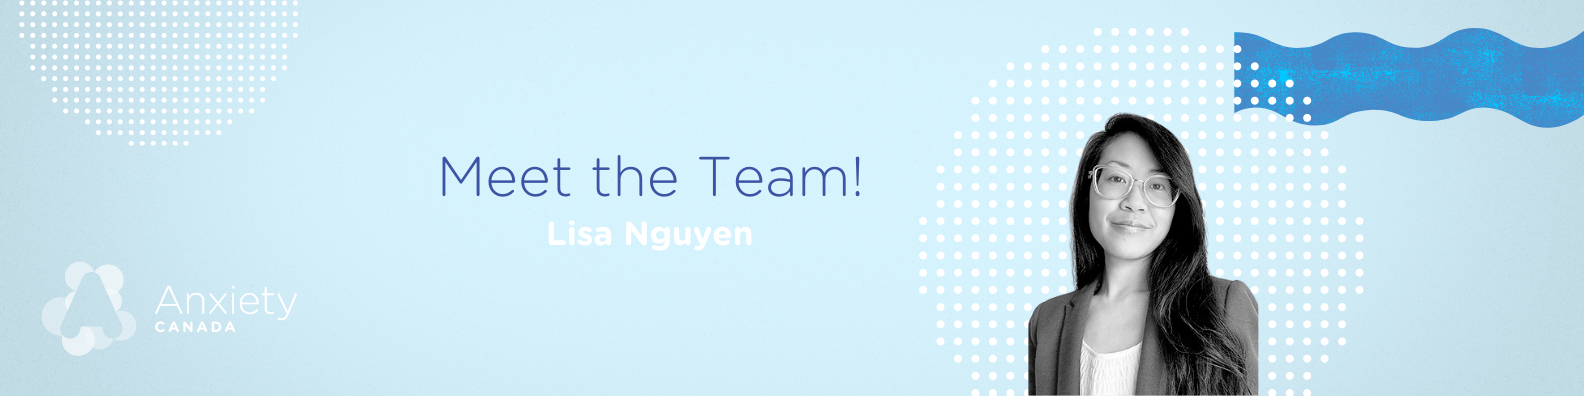 Meet the Anxiety Canada Team: Image of Lisa Nguyen, Office Manager at Anxiety Canada (Banner)nior Manager of Development and Communications at Anxiety Canada.